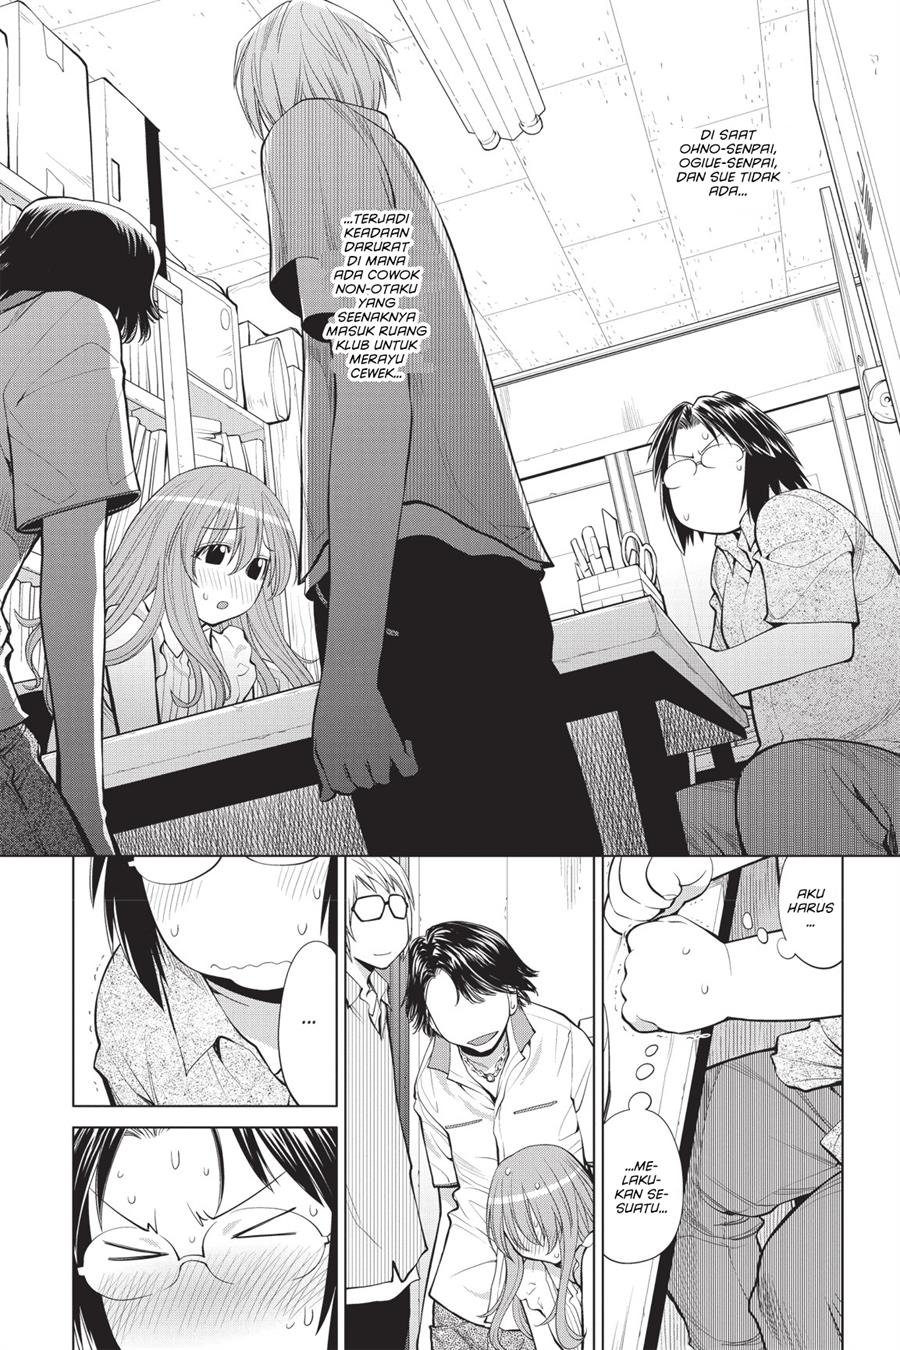 Genshiken – The Society for the Study of Modern Visual Culture Chapter 68 Image 7